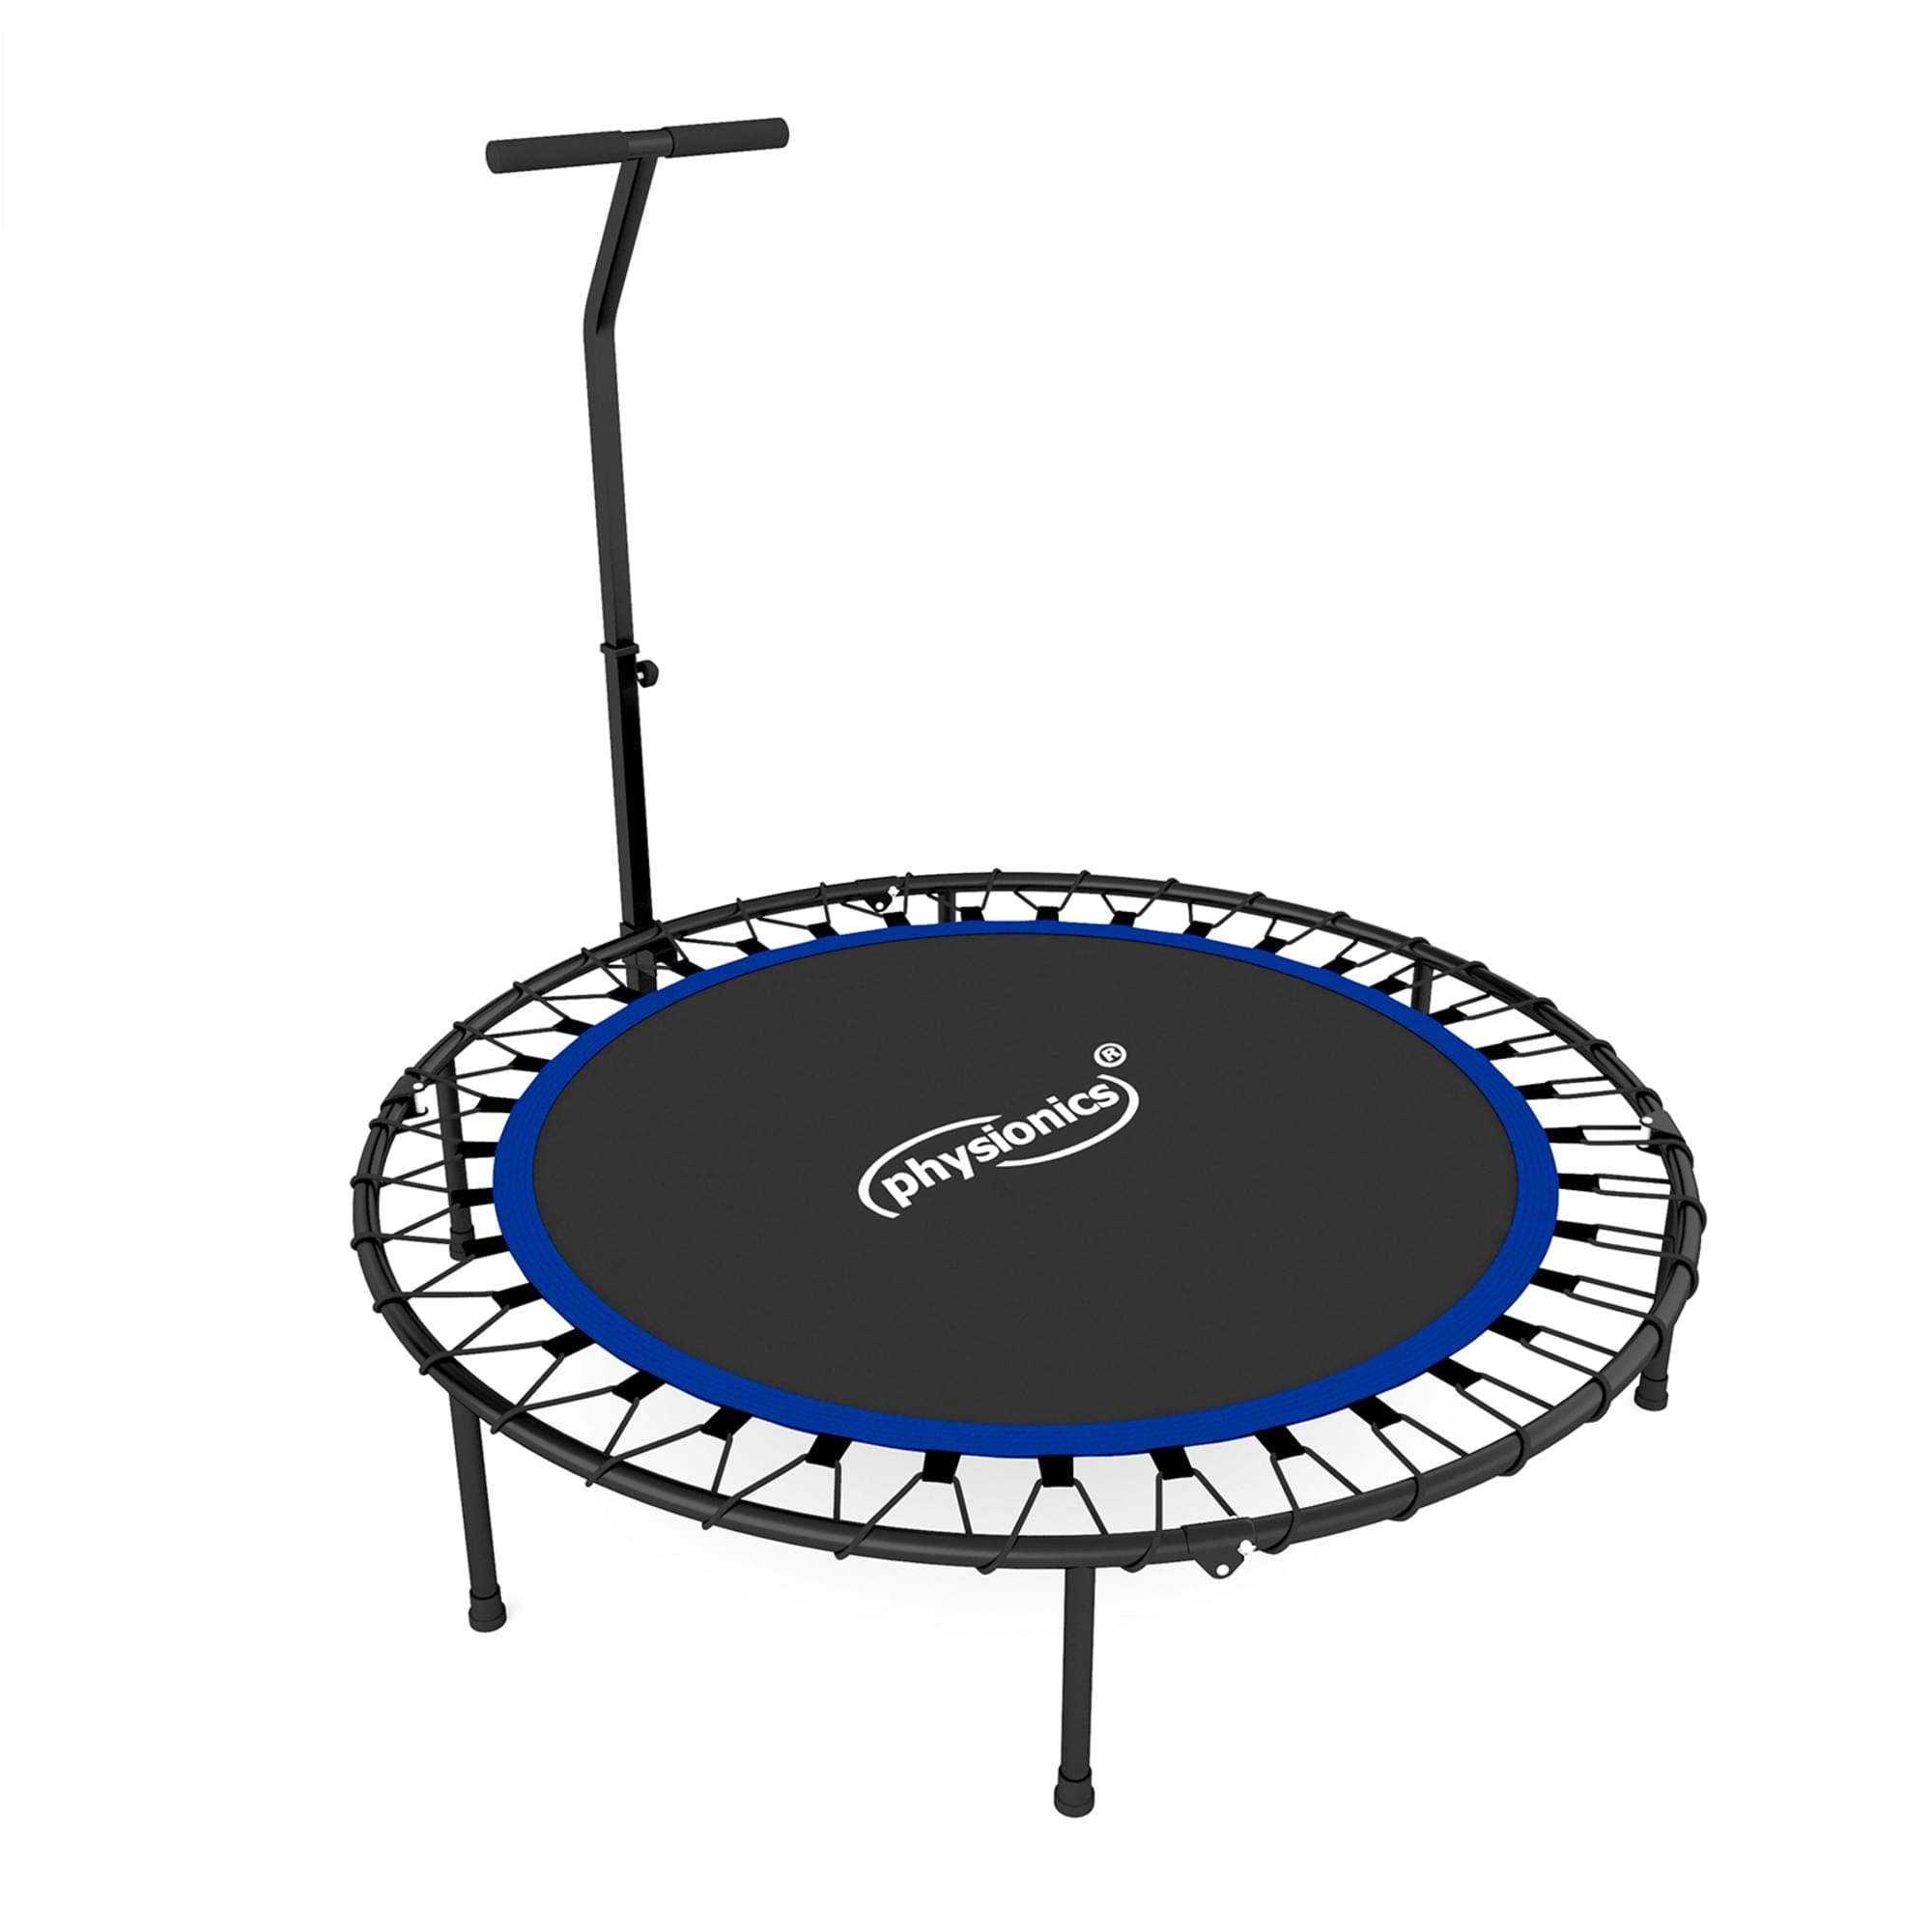 Physionics Mini Trampoline Blue-Black Mini Trampoline Body Workout Exercise Fitness Bouncer in 2 Sizes 